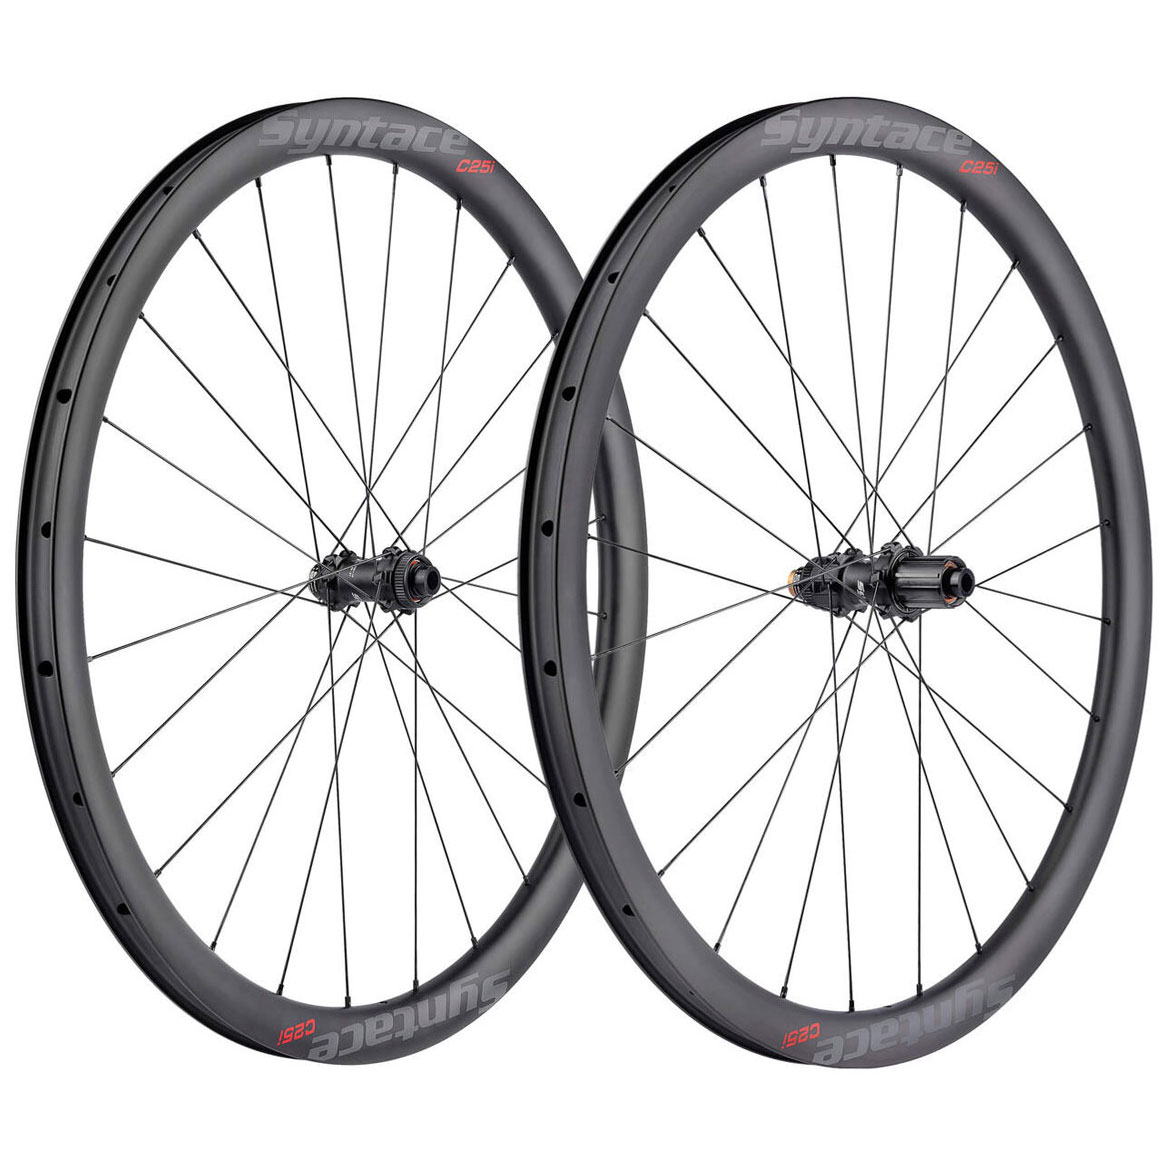 Picture of Syntace C25i Carbon SpeedTorque 700c - Wheelset - 24 Holes - 12x100/12x142mm - HG